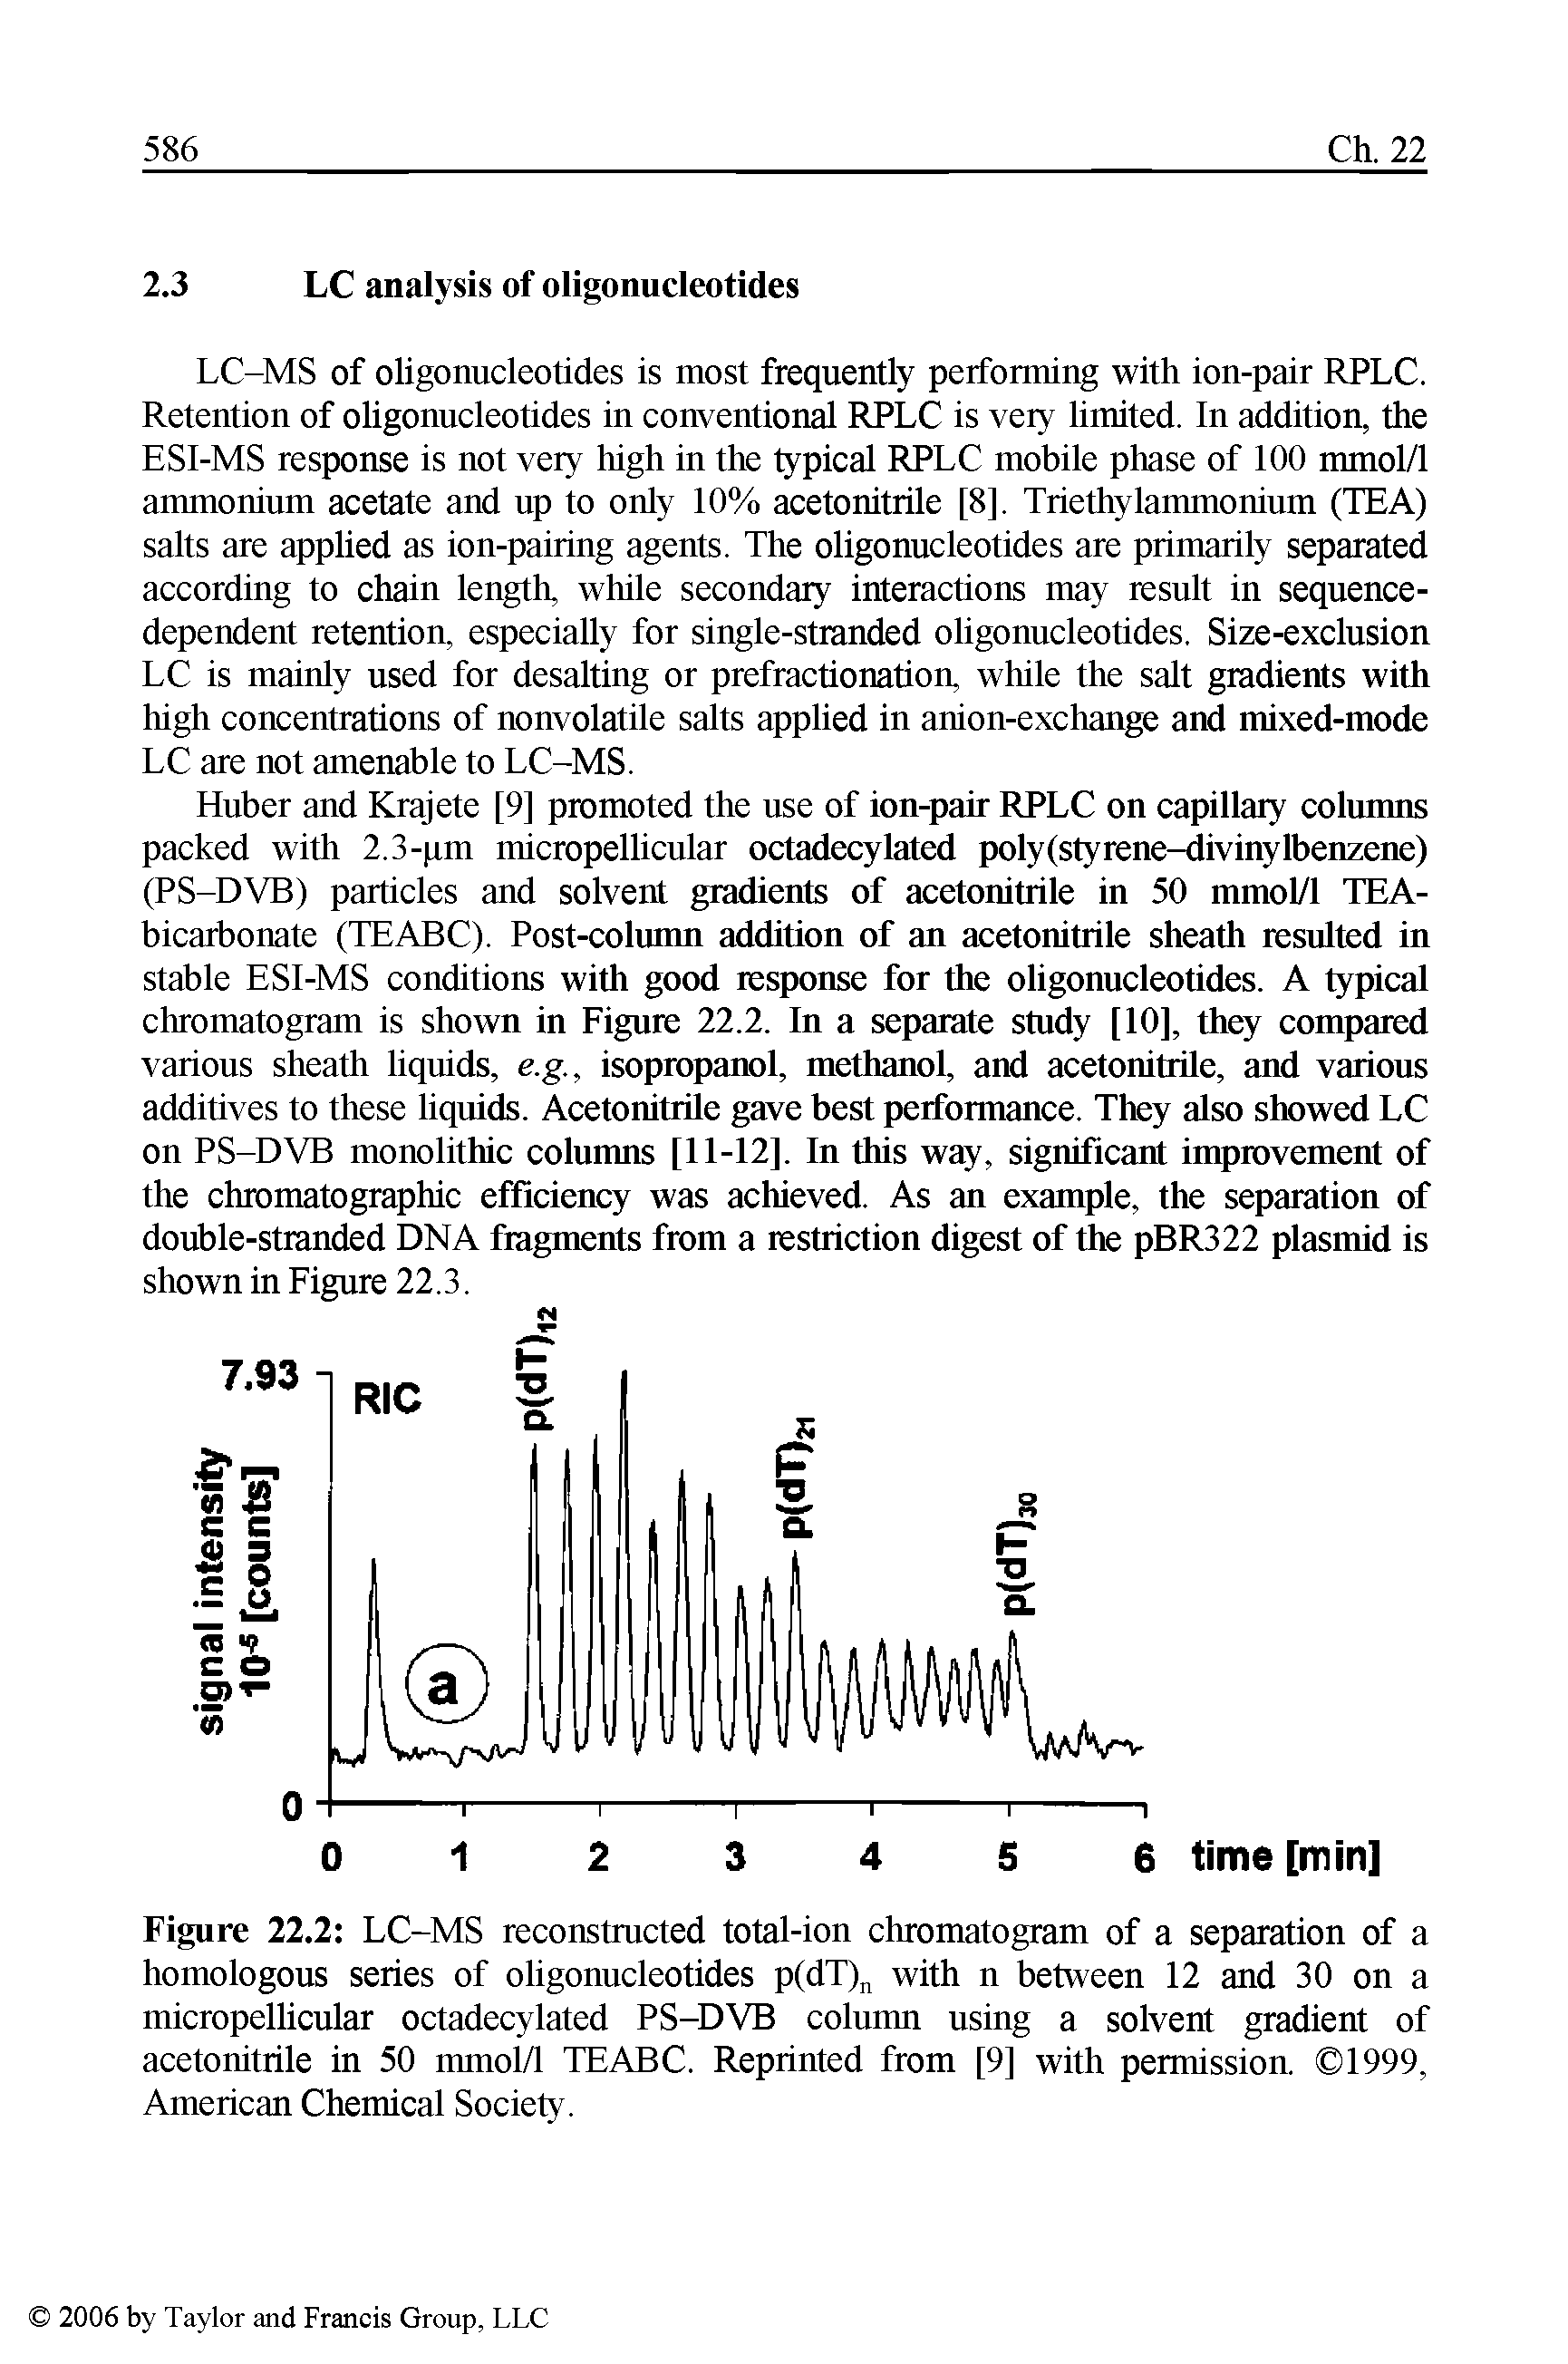 Figure 22.2 LC-MS reconstracted total-ion chromatogram of a separation of a homologous series of oligonucleotides p(dT) with n between 12 and 30 on a micropellicular octadecylated PS-DVB column using a solvent gradient of acetonitrile in 50 mmol/1 TEABC. Reprinted from [9] with permission. 1999, American Chemical Society.